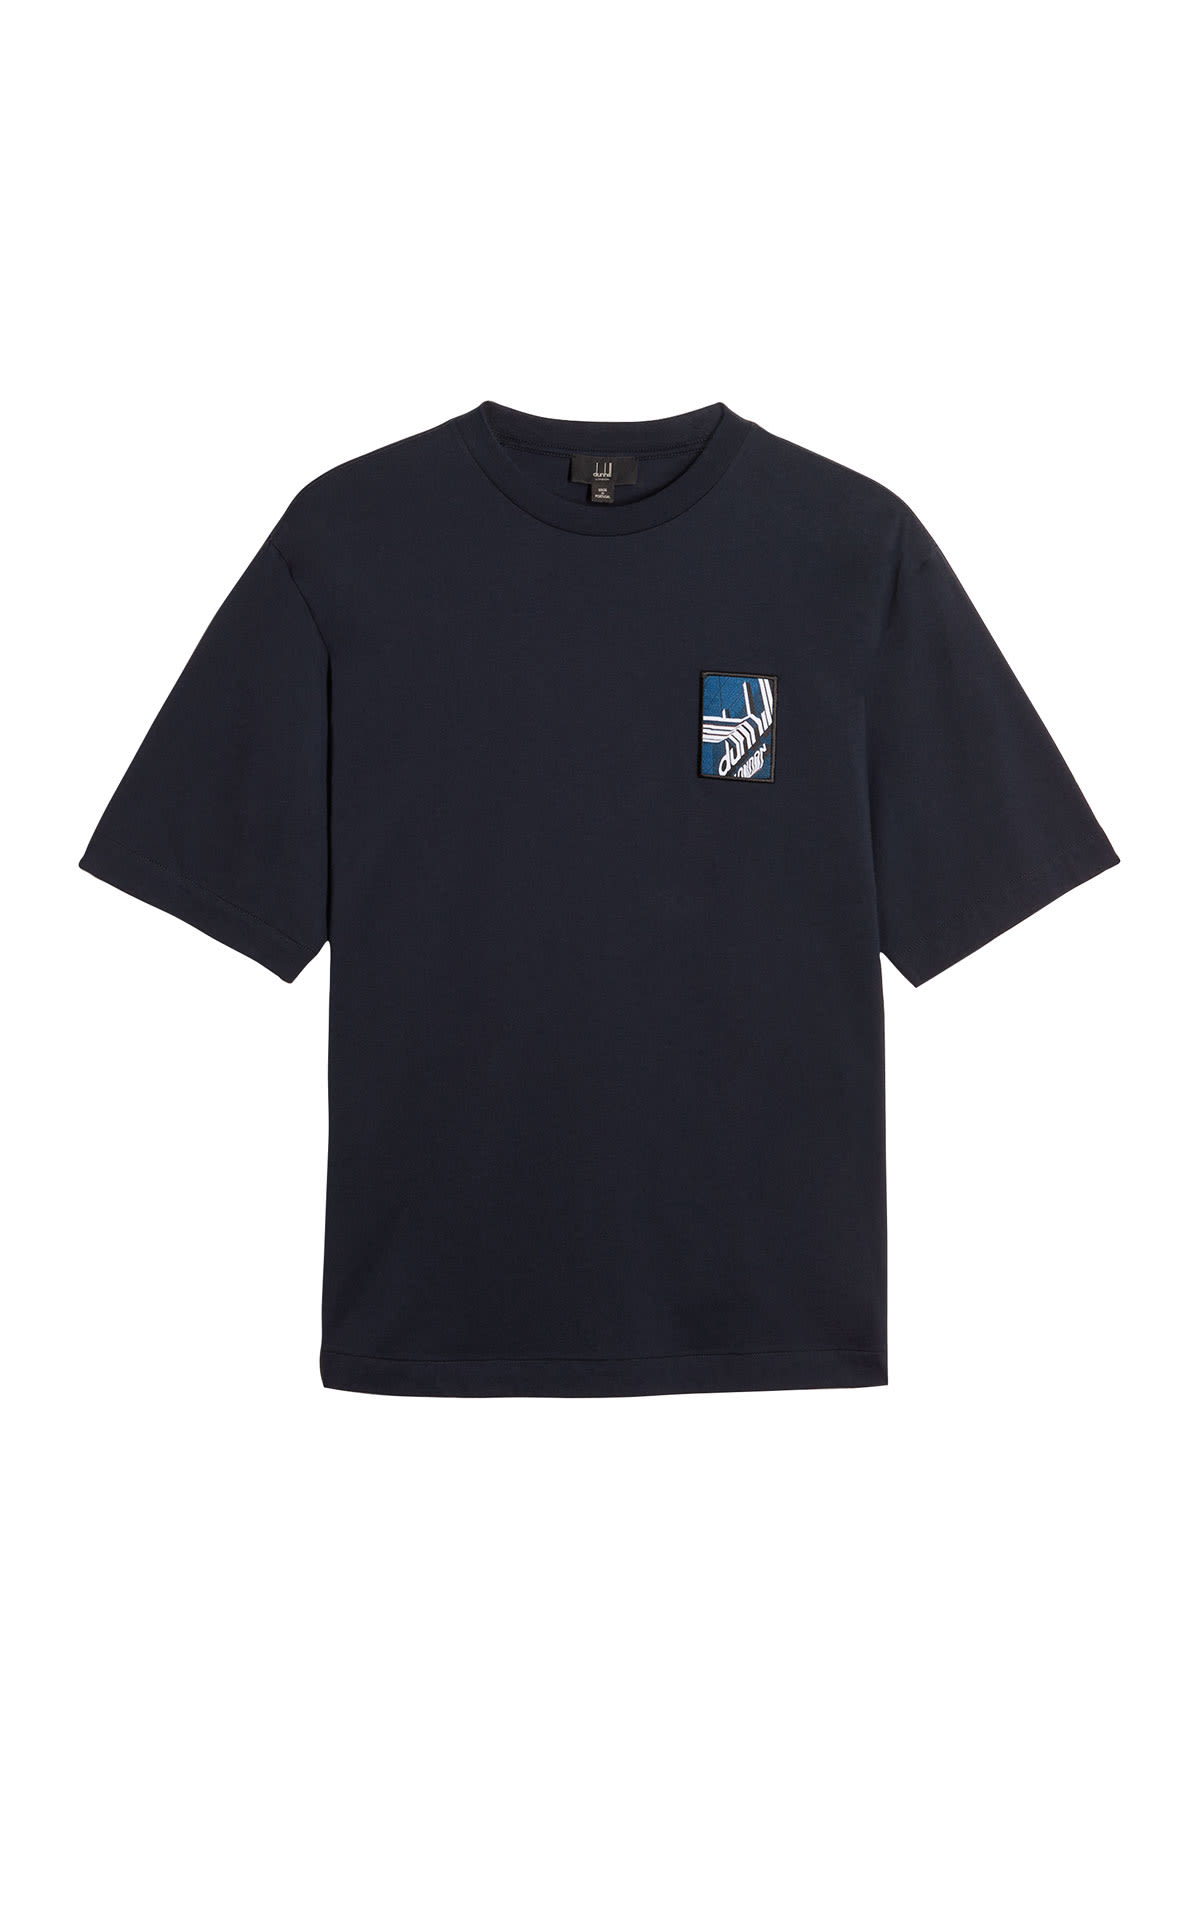 Dunhill Ginza logo soft cotton ss t-shirt from Bicester Village